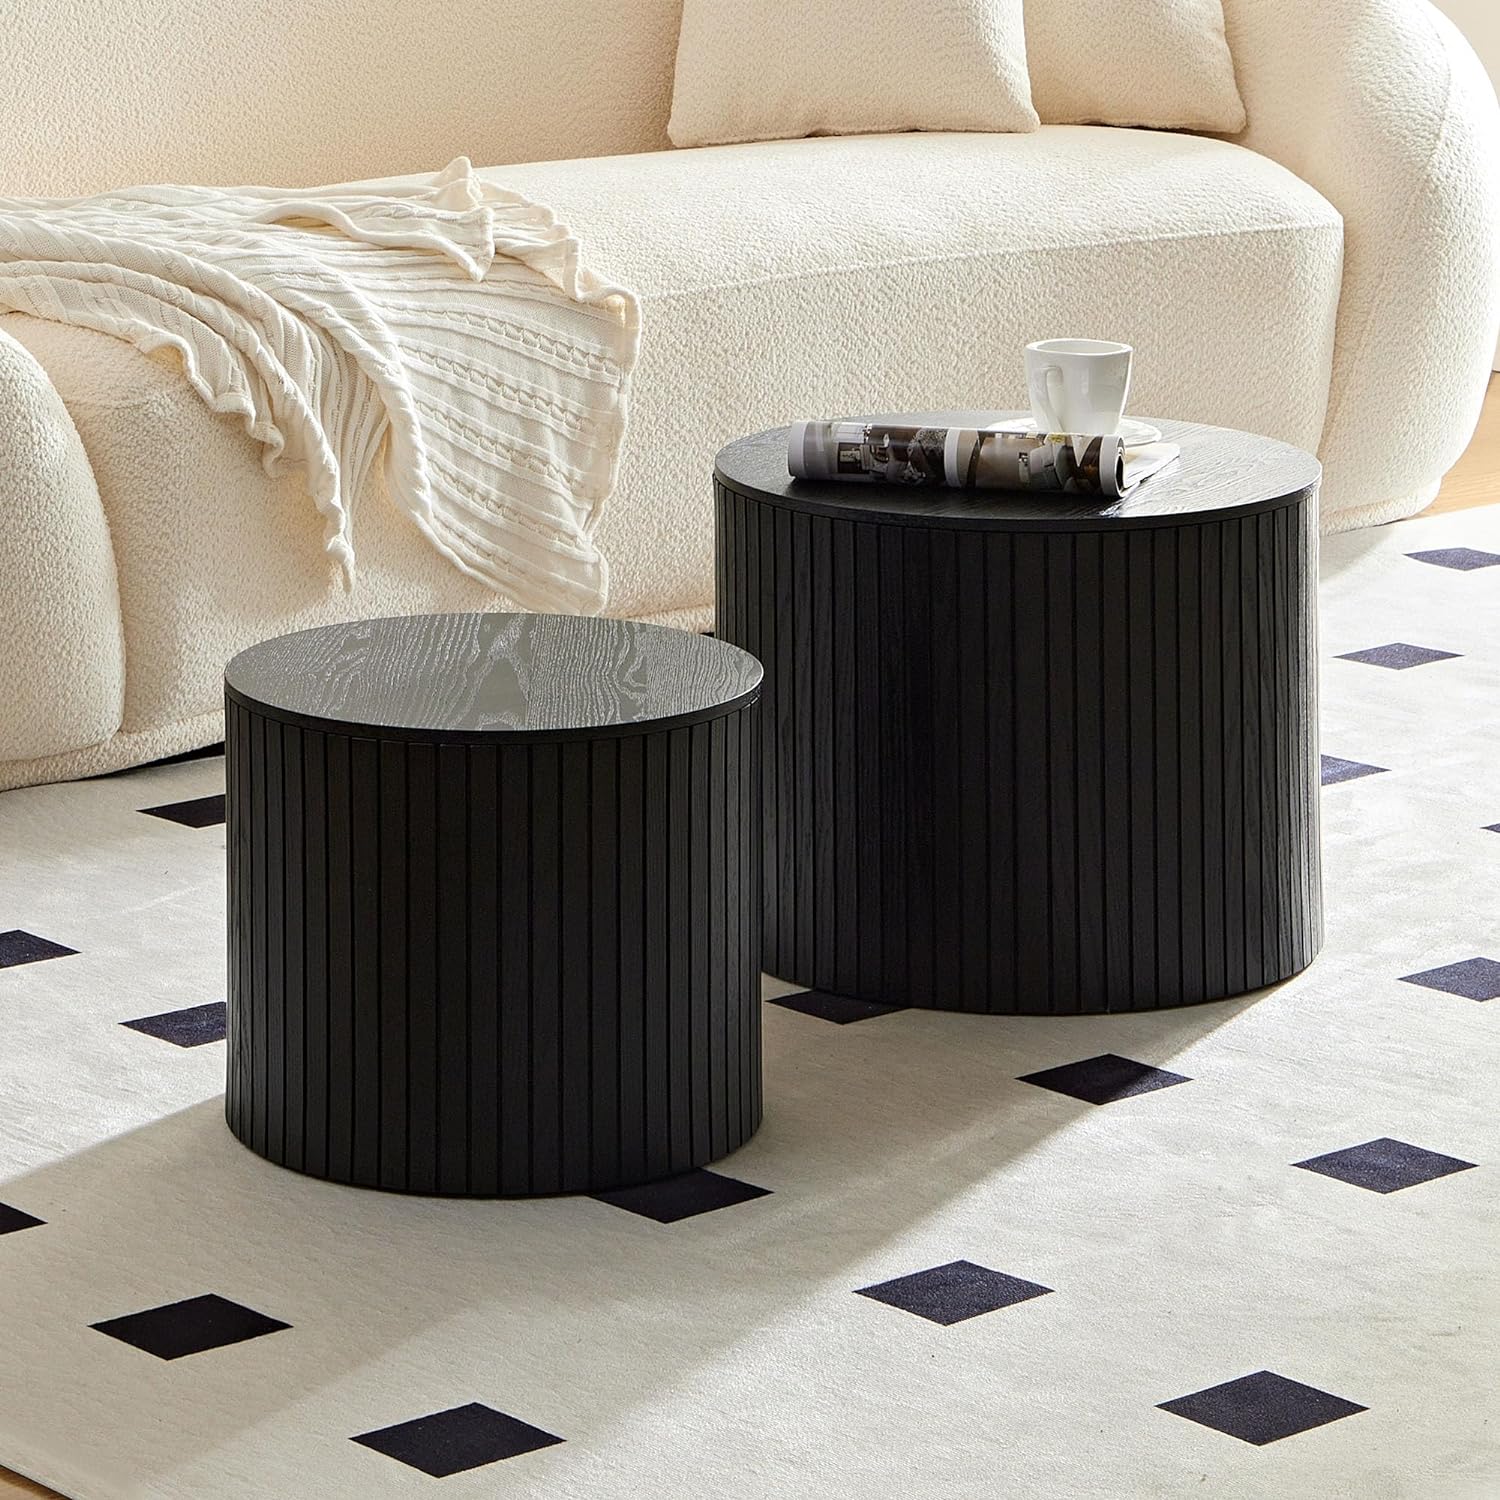 WILLIAMSPACE 19.17 Nesting Coffee Table Set of 2, Black Round Wooden Modern Circle Center Table with Storage for Living Room, Accent End Side Table for Small Space (Black)